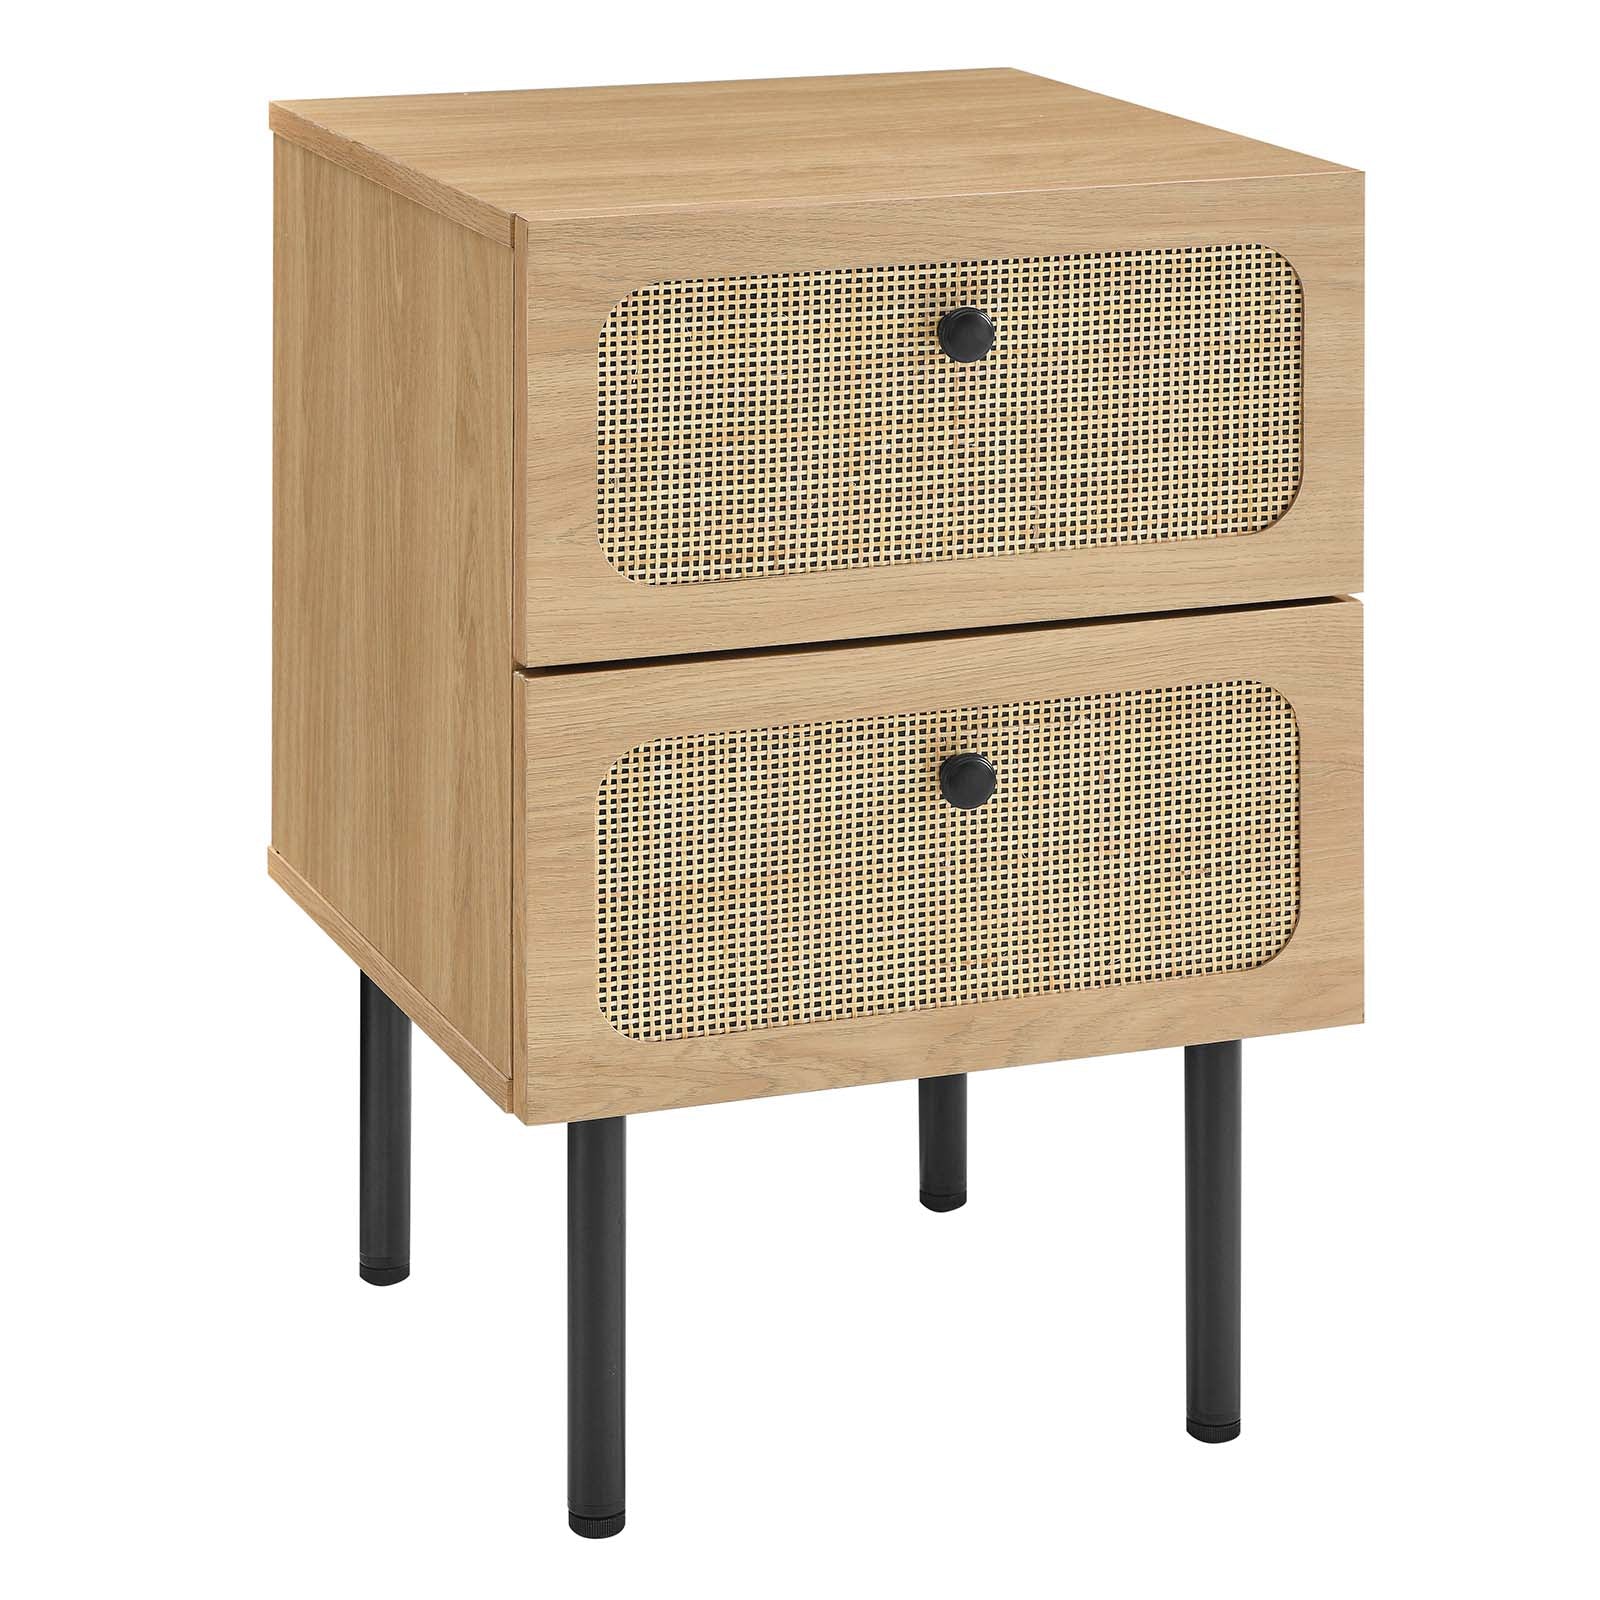 Chaucer 2-Drawer Nightstand